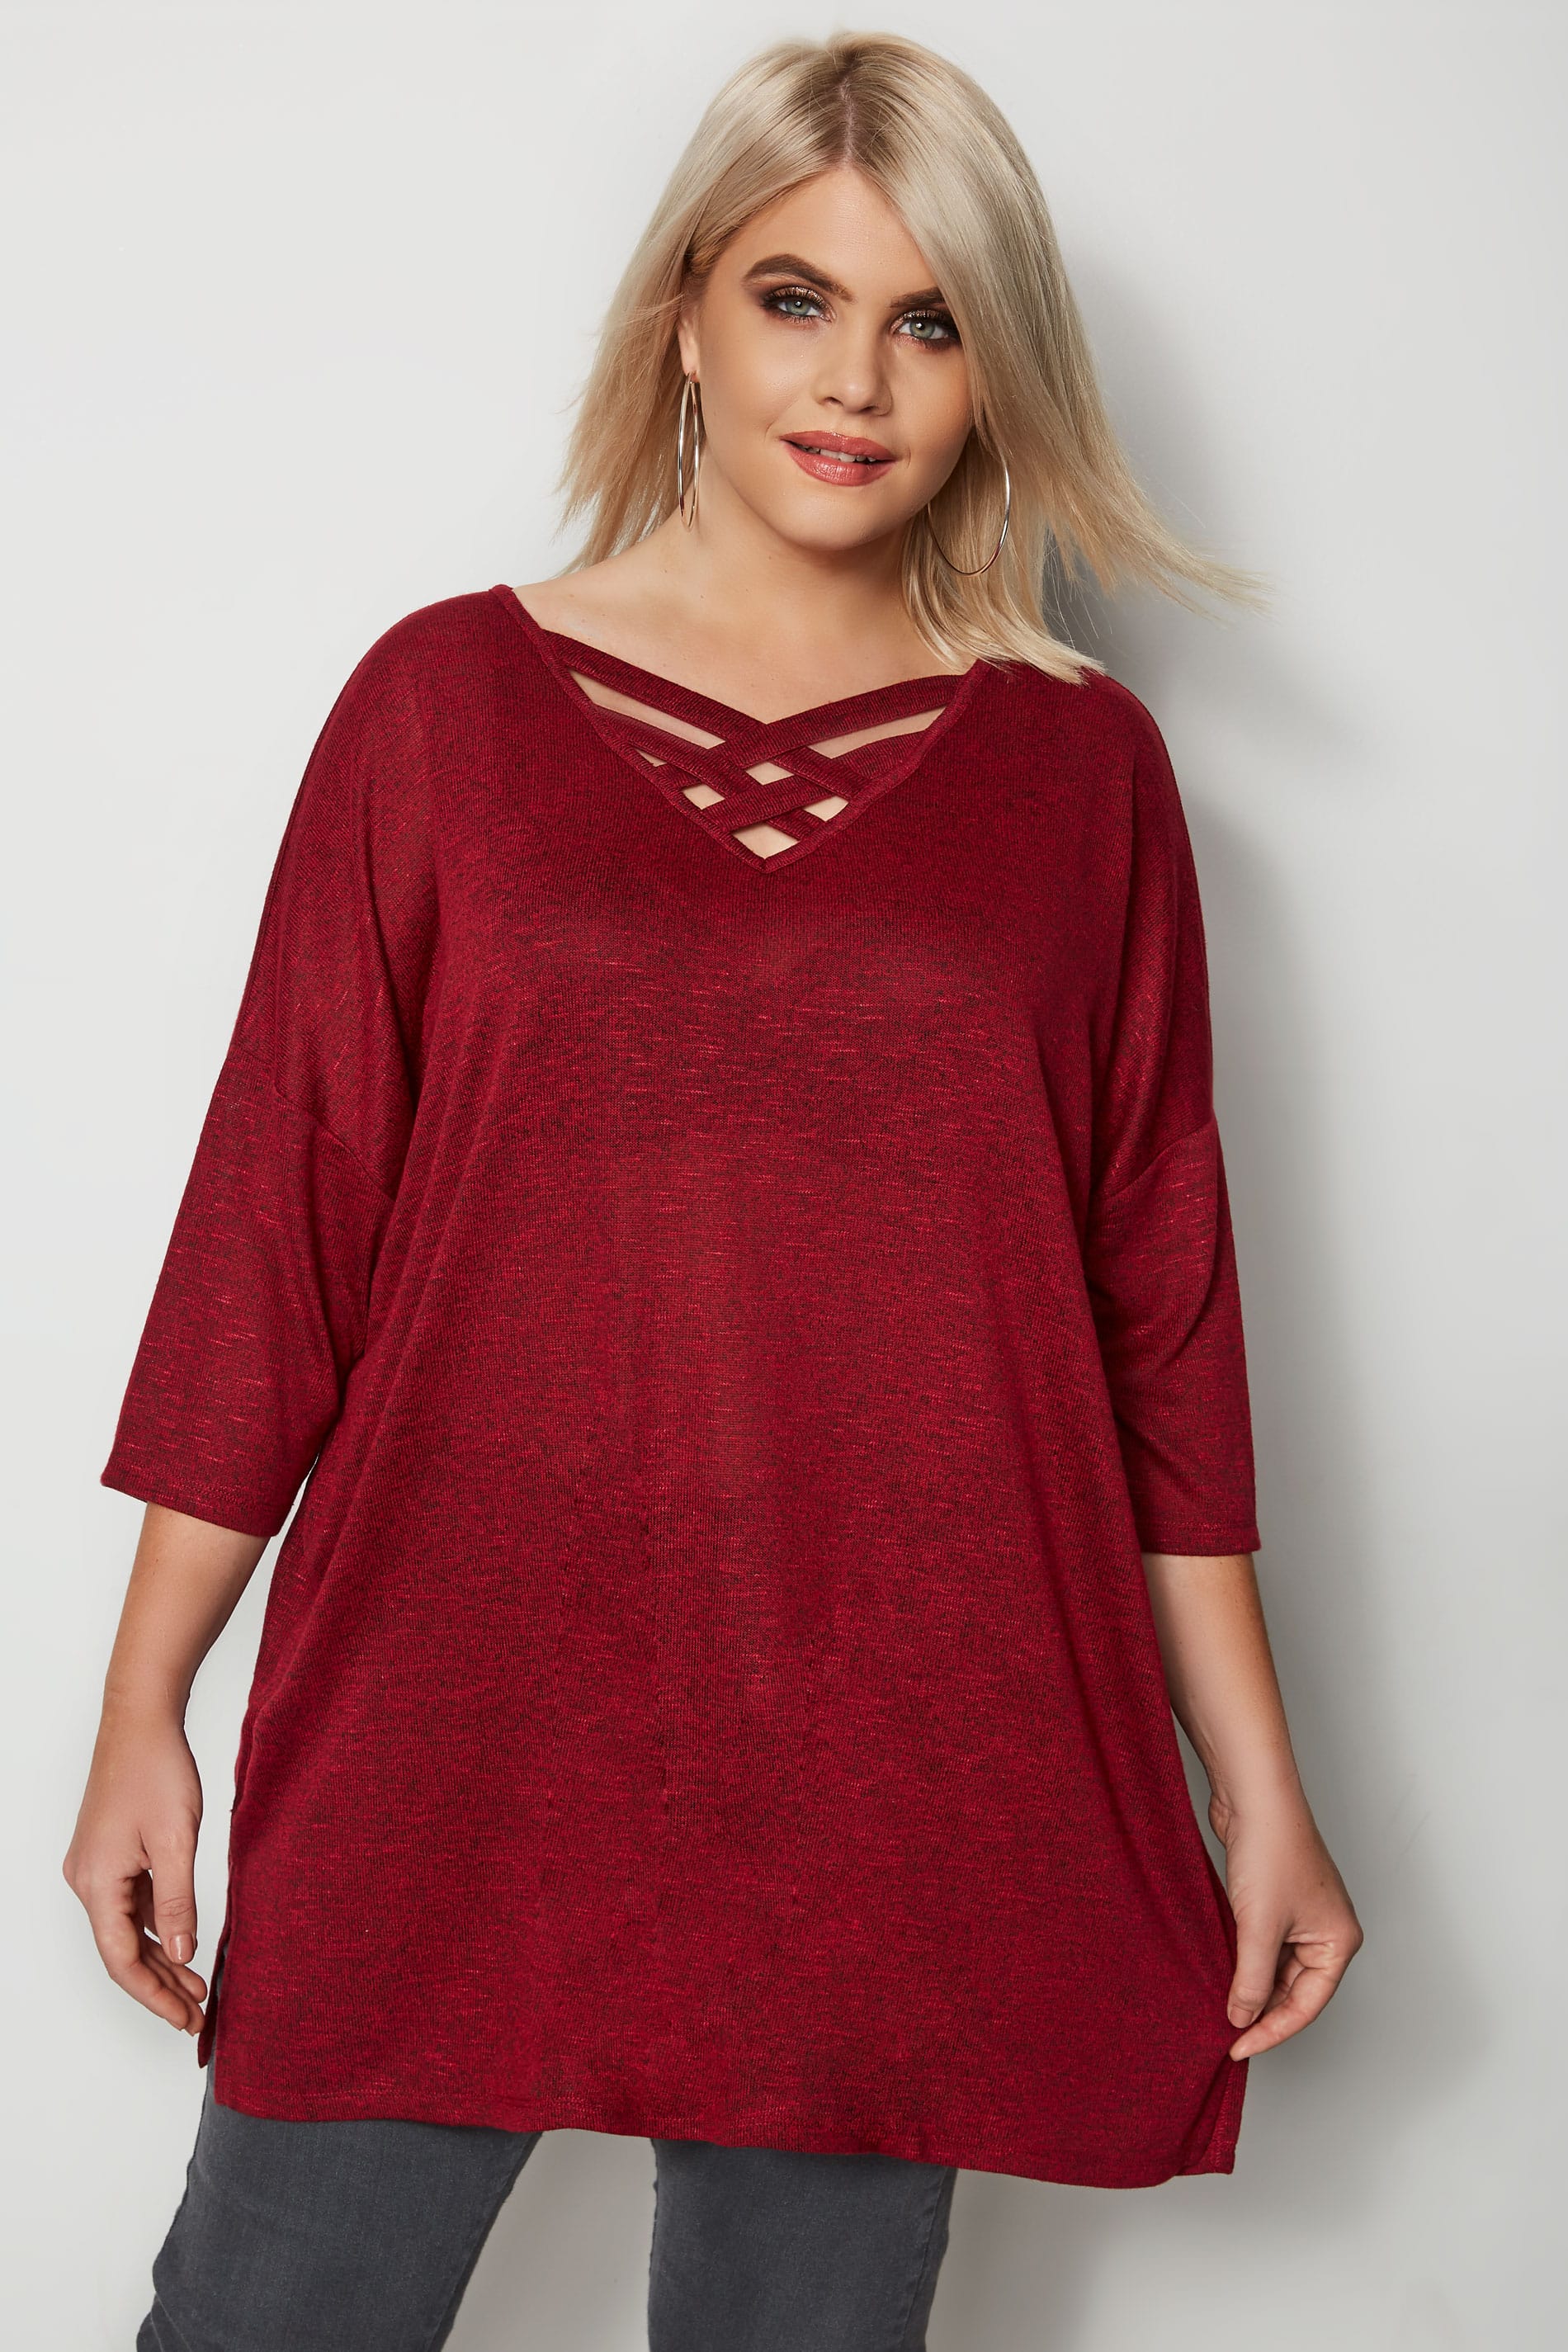 Red Lattice Front Knitted Top, plus size 16 to 36 | Yours Clothing